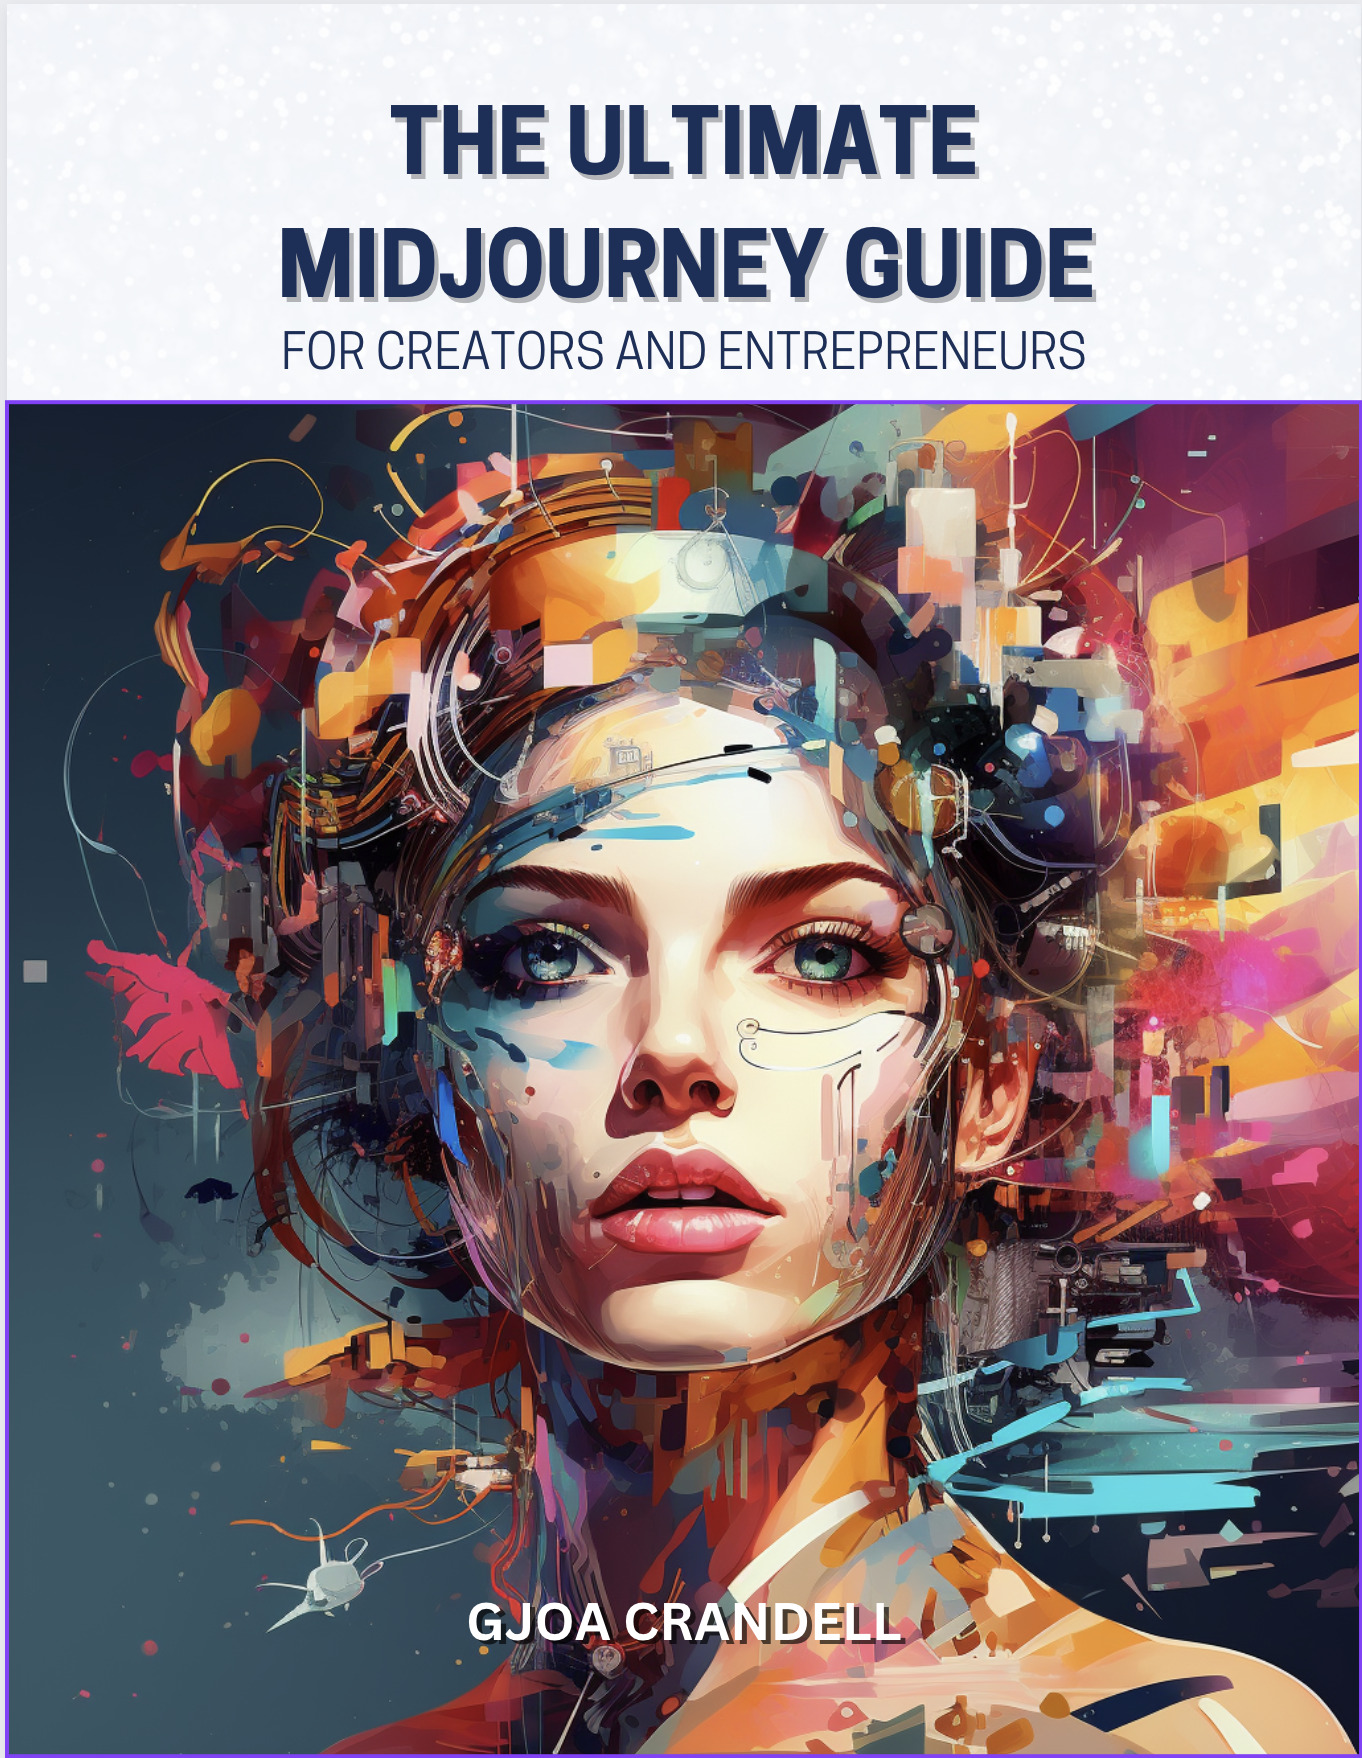 Using Midjourney for Crafts: A New Age of Digital Artistry